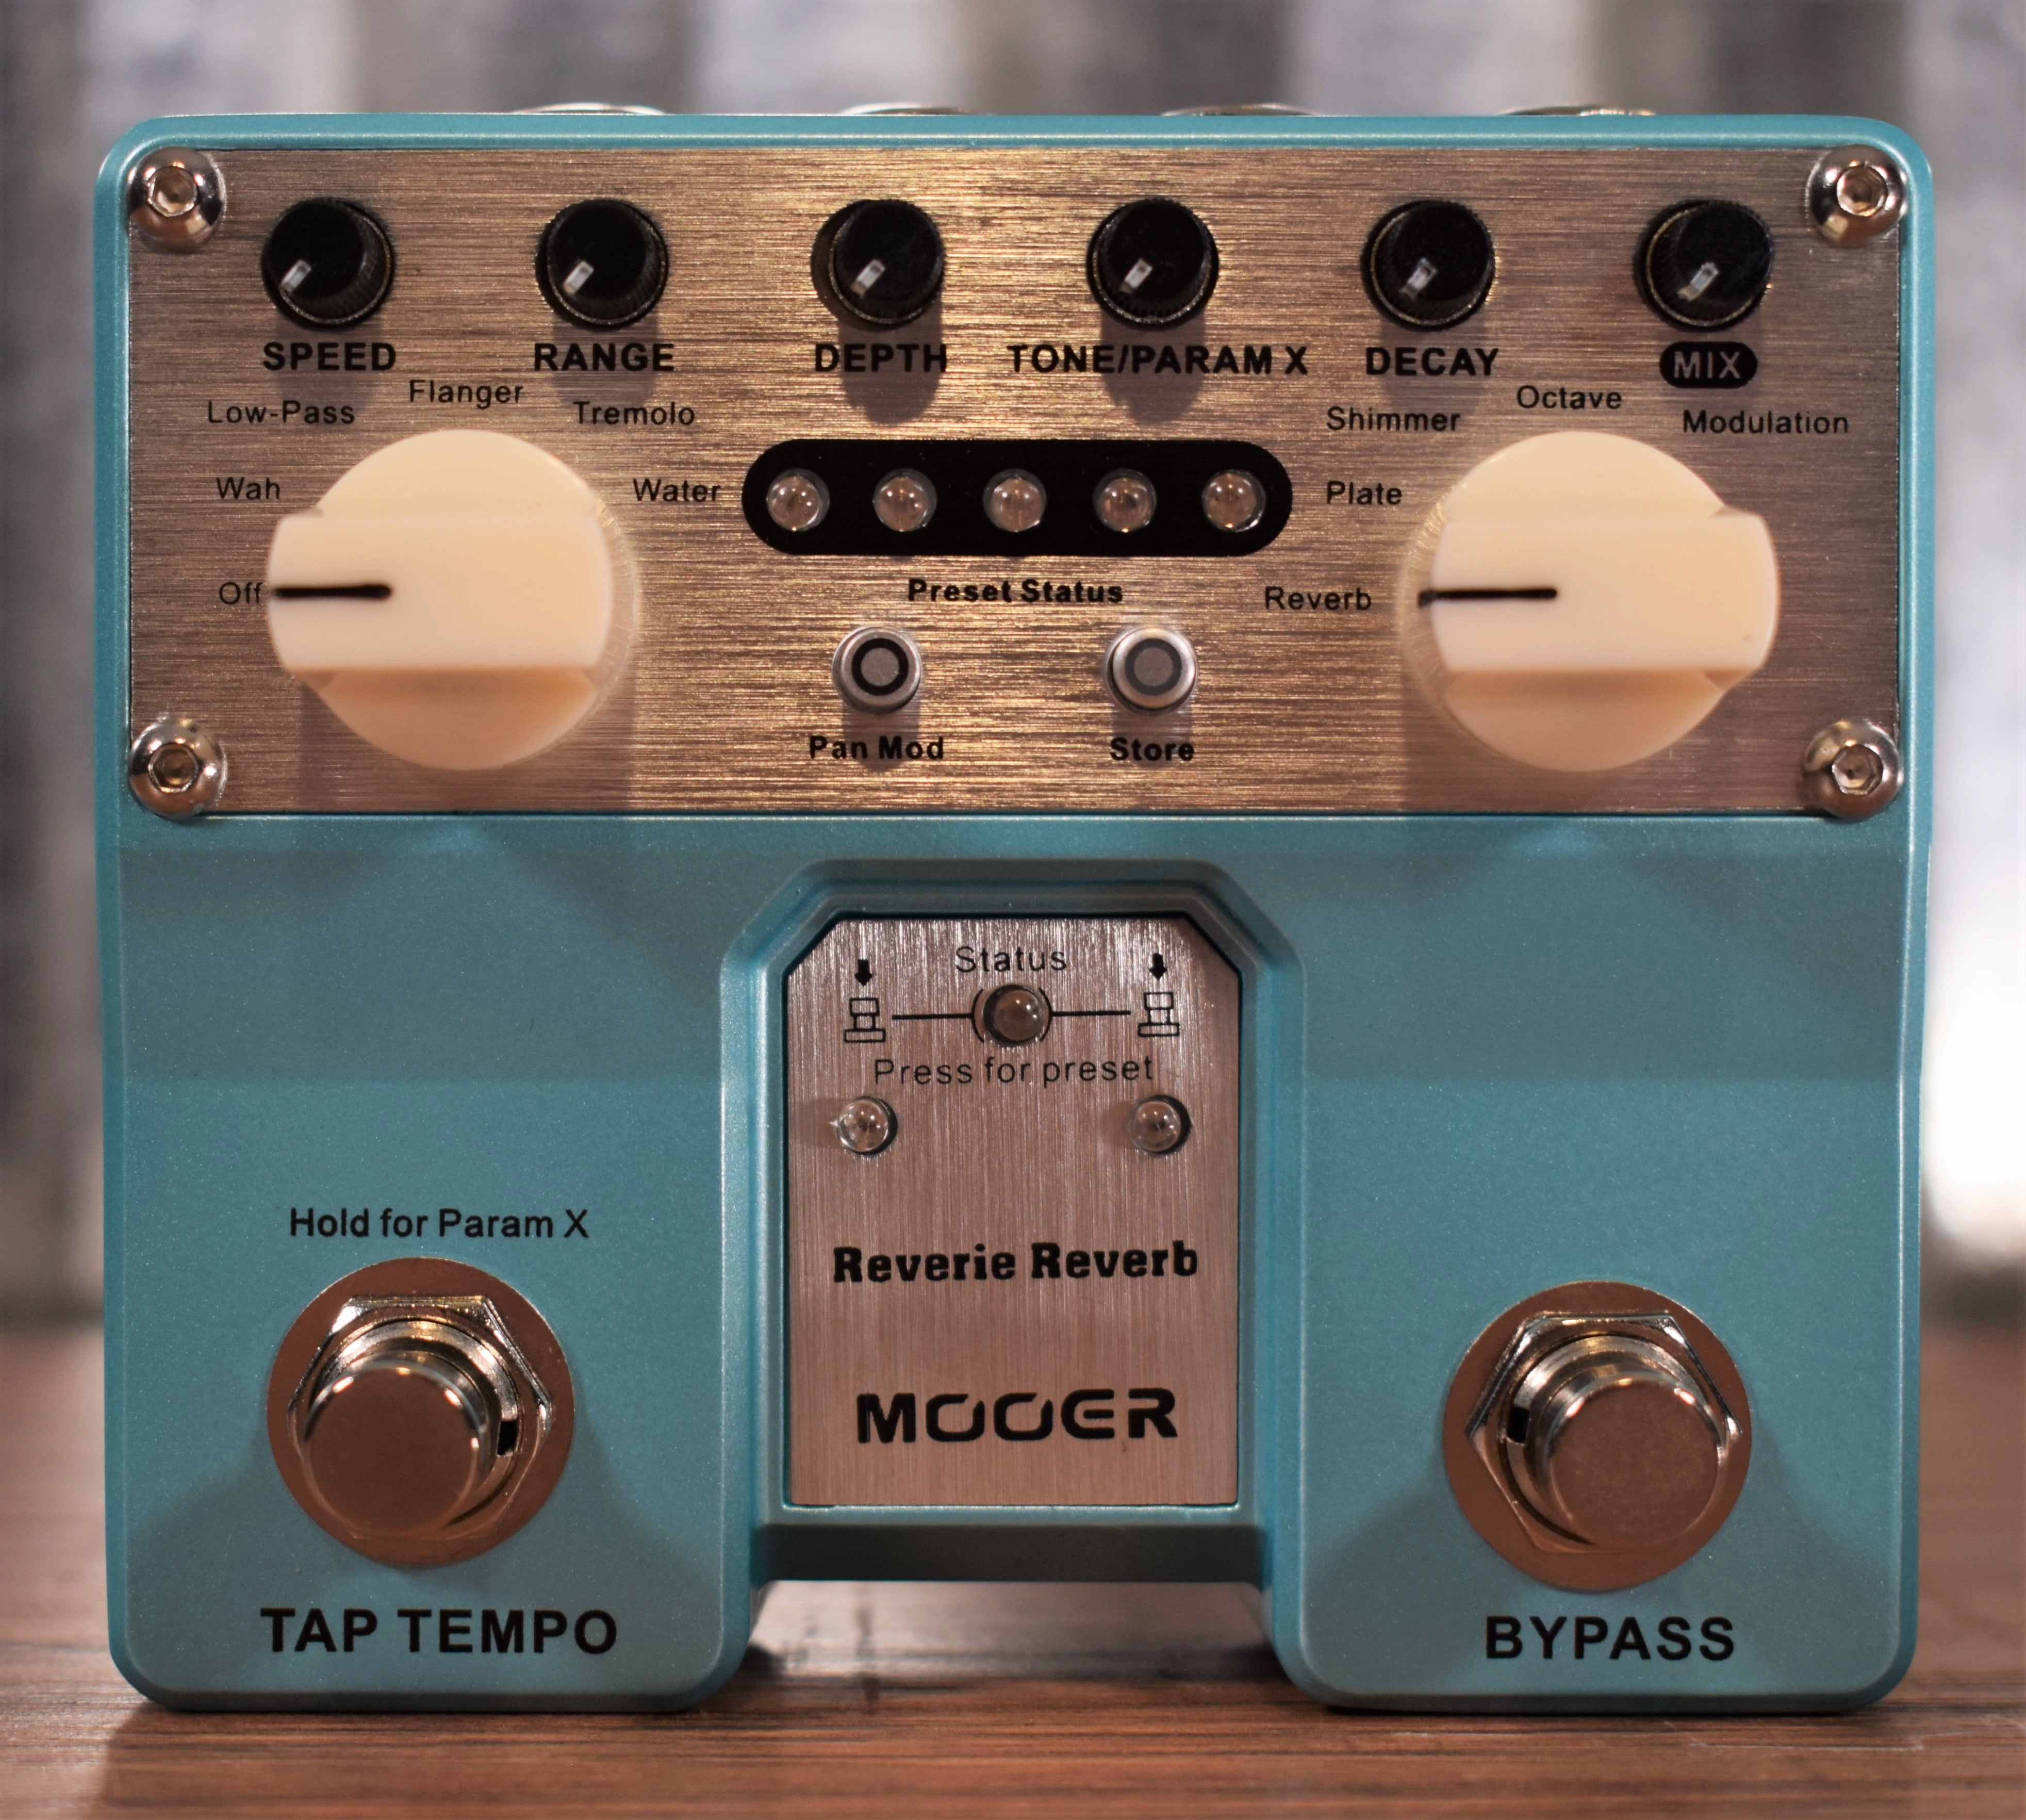 Mooer Audio TRV2 Twin Series Reverie Reverb Guitar Effect Pedal B Stoc –  Specialty Traders